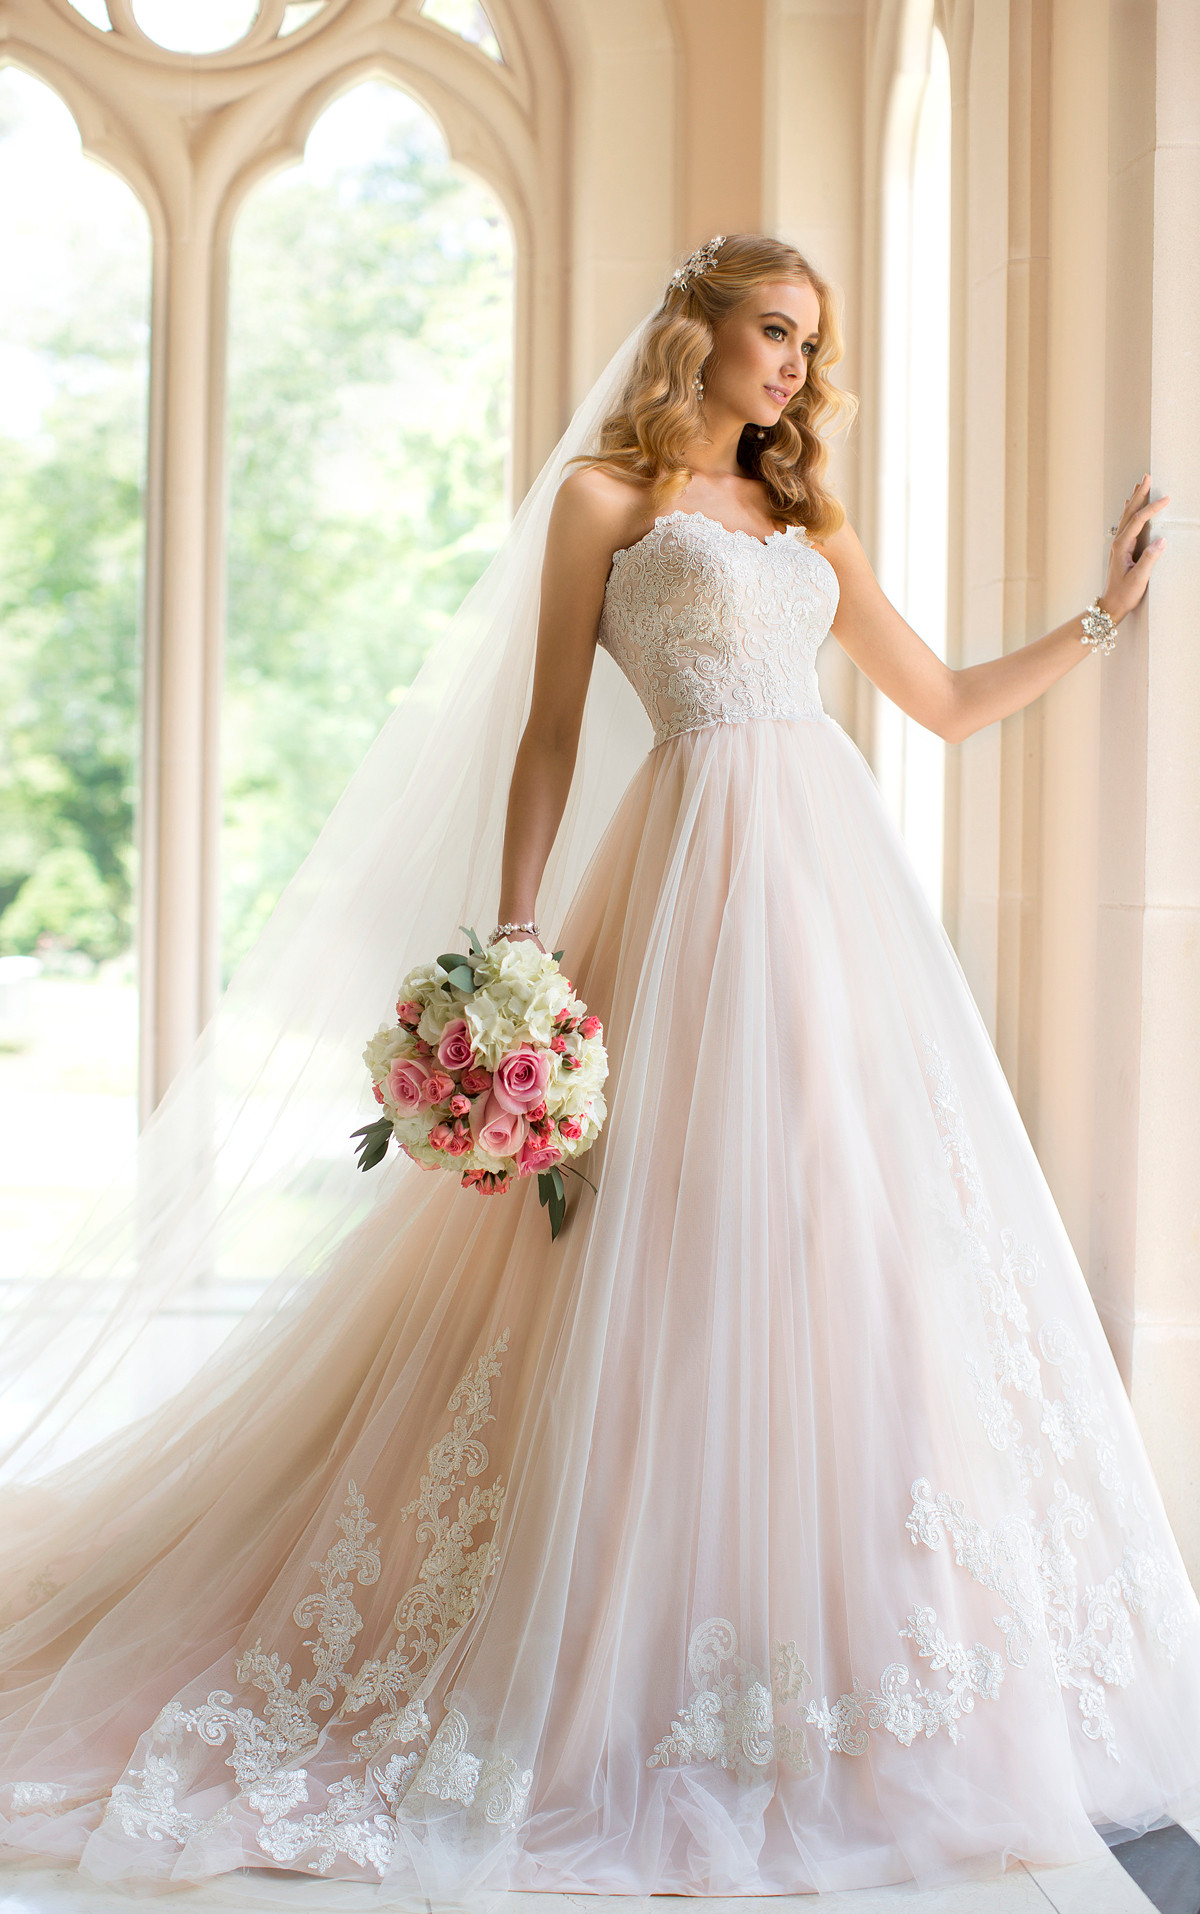 Designer Couture Wedding Gowns
 The Best Gowns from The Most In Demand Wedding Dress